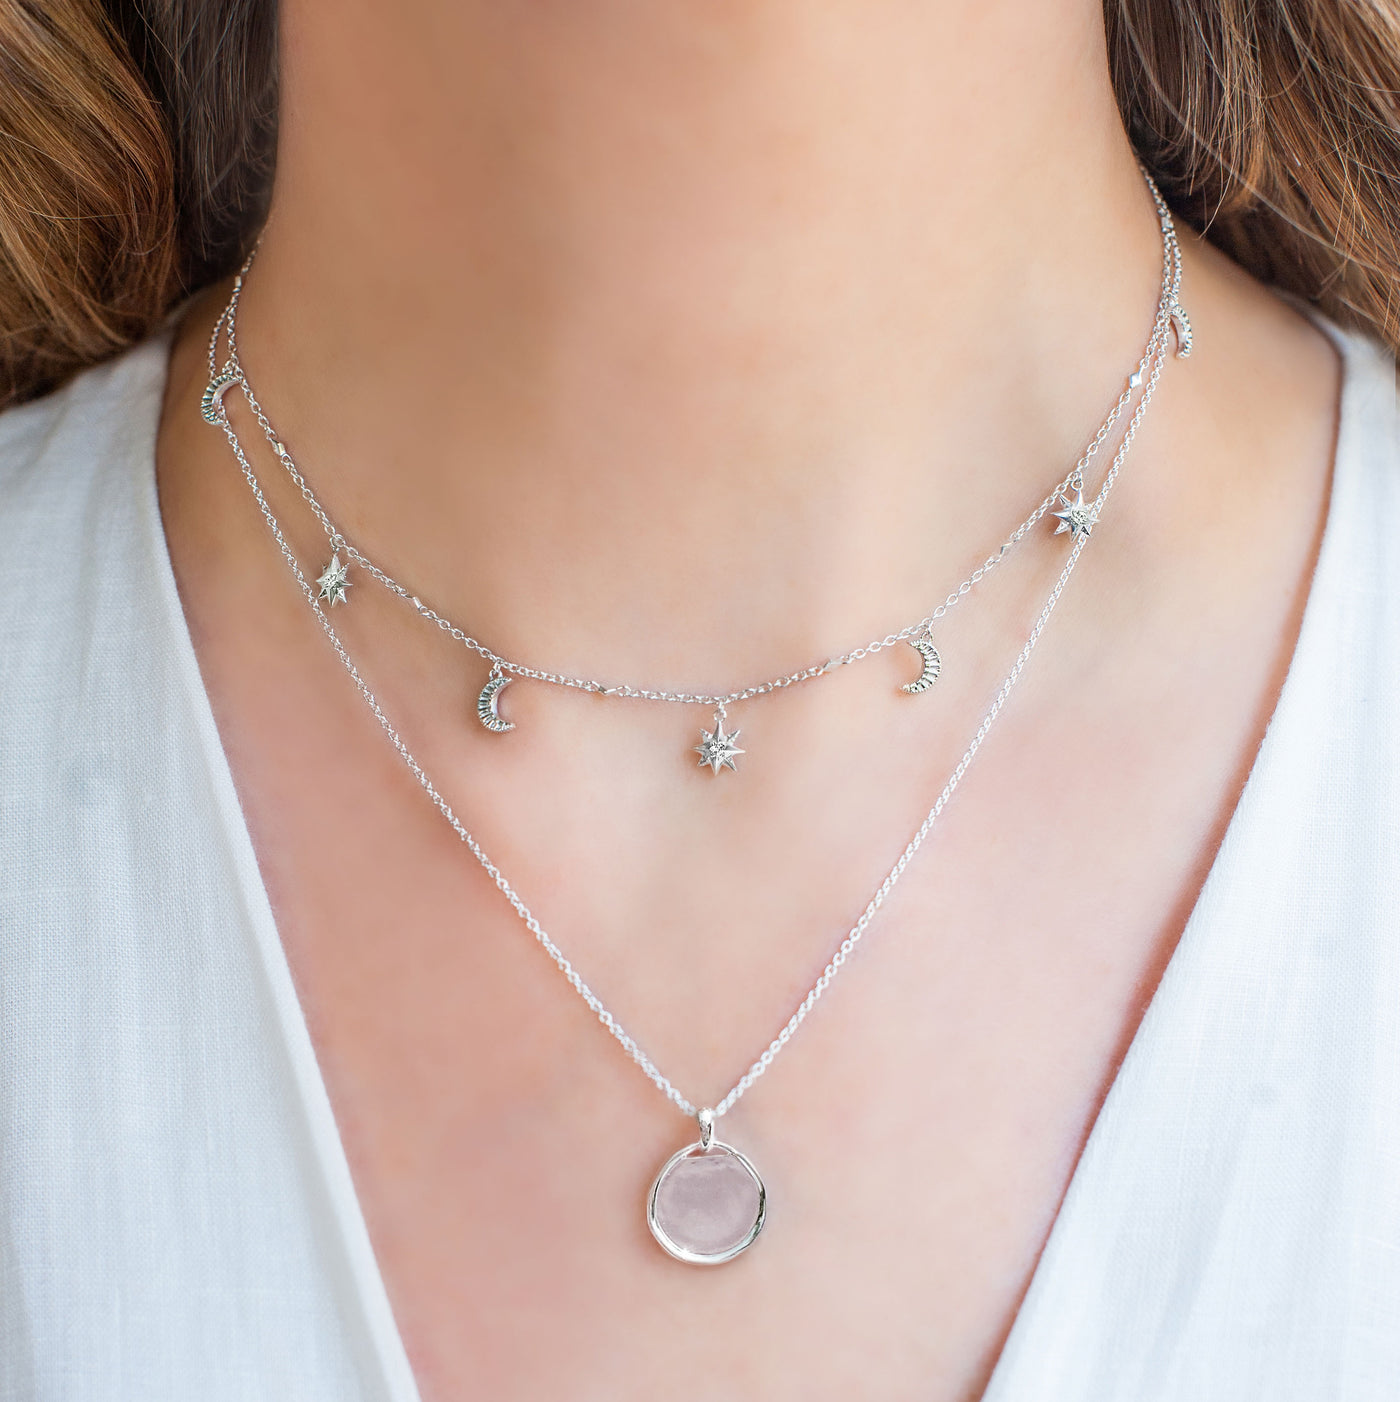 Model wearing sterling silver moon and star choker necklace with CZ crystals and silver coin necklace